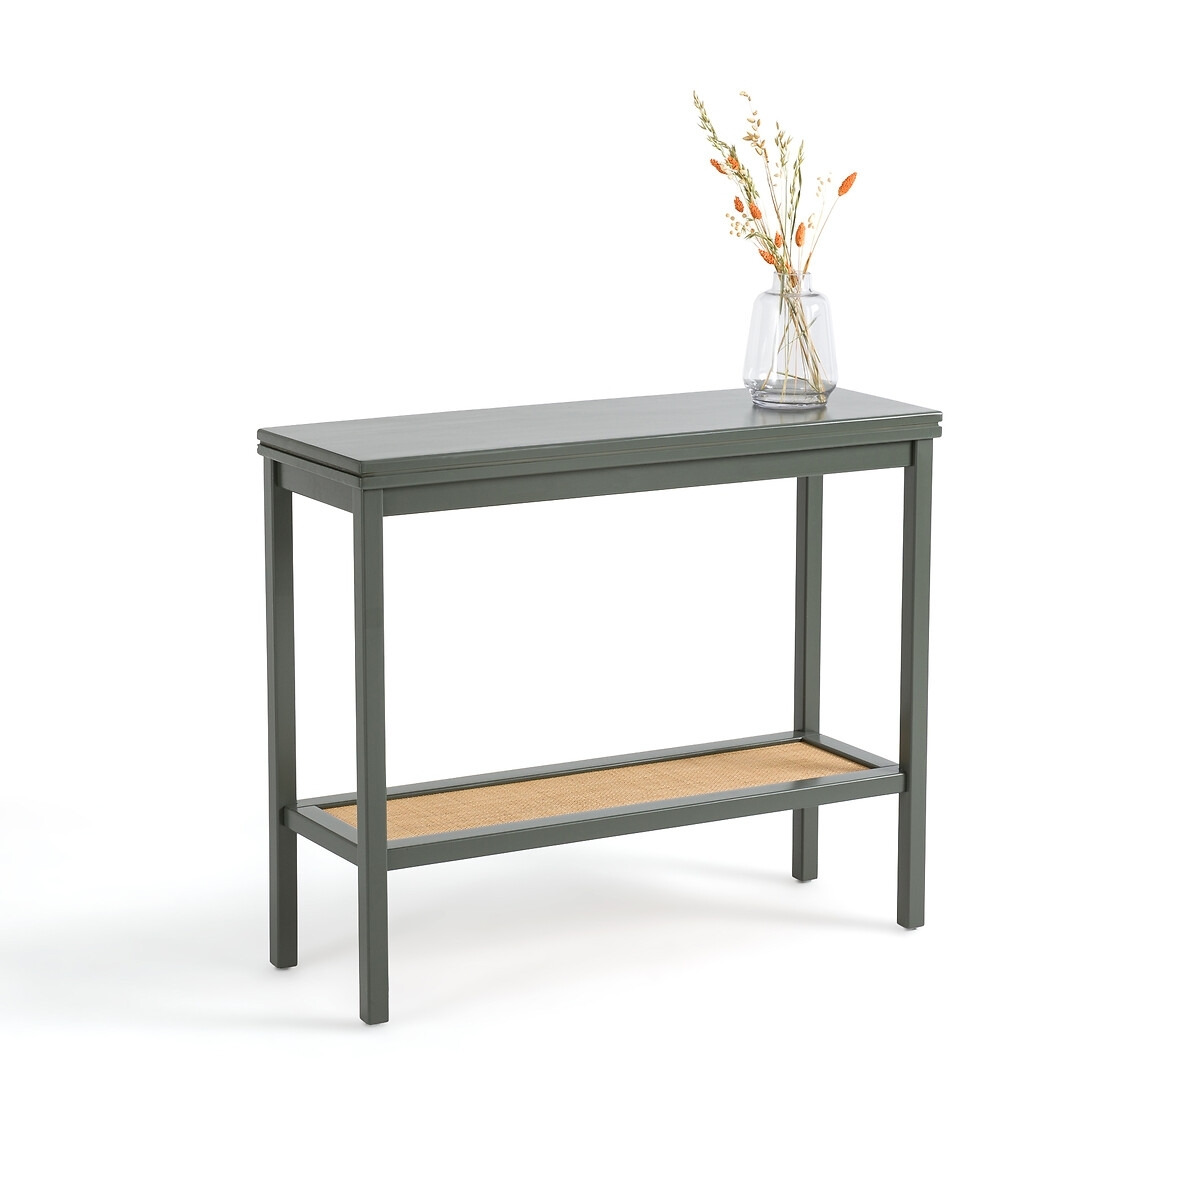 Gabin Solid Pine & Cane Double Level Console Table - image 1